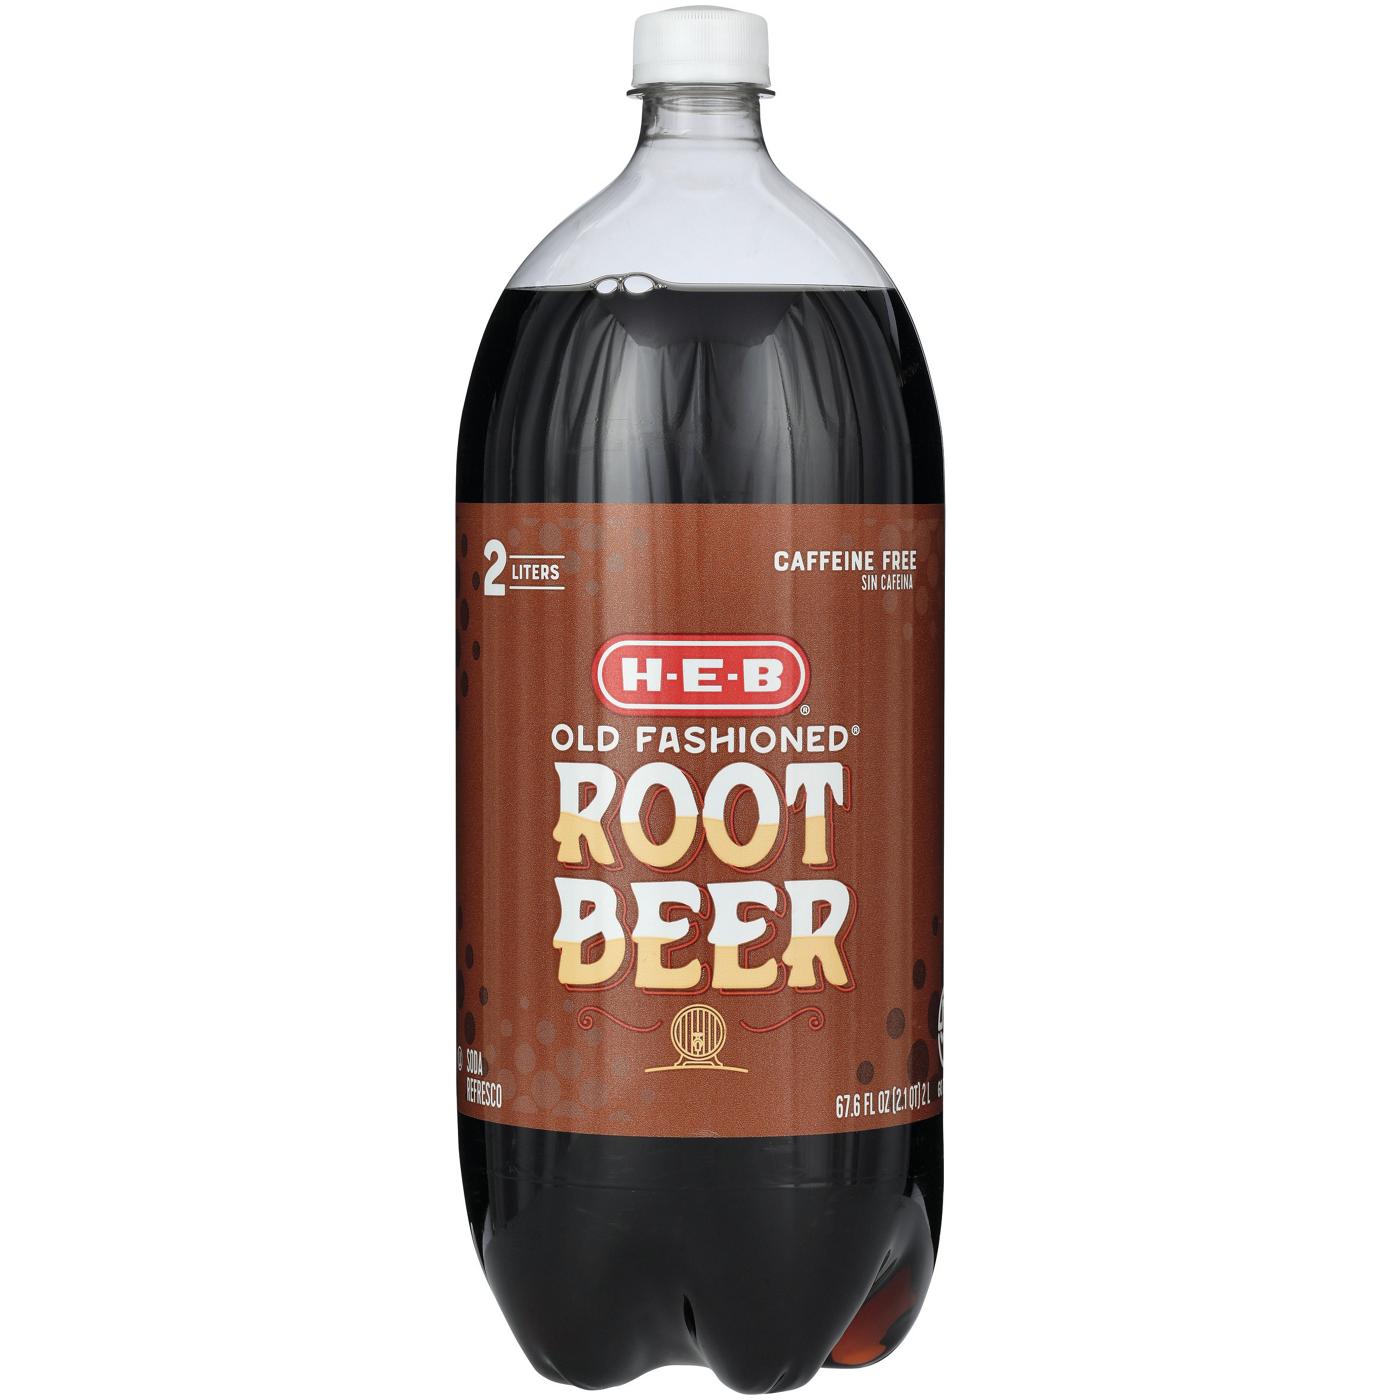 H-E-B Old Fashioned Root Beer Soda; image 2 of 2